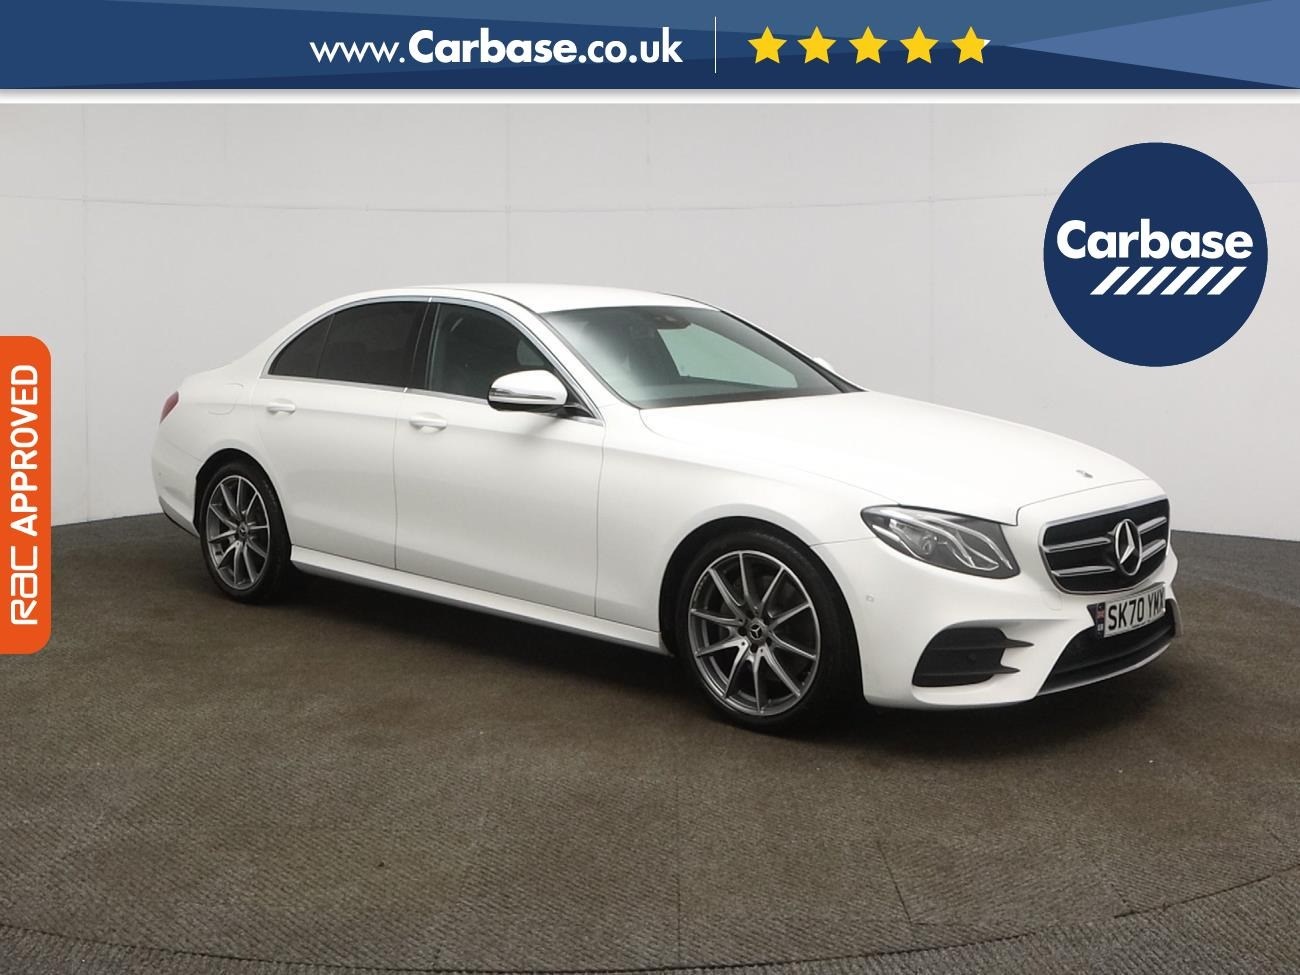 2020 used Mercedes-Benz E Class E200 AMG Line Edition 4dr 9G-Tronic